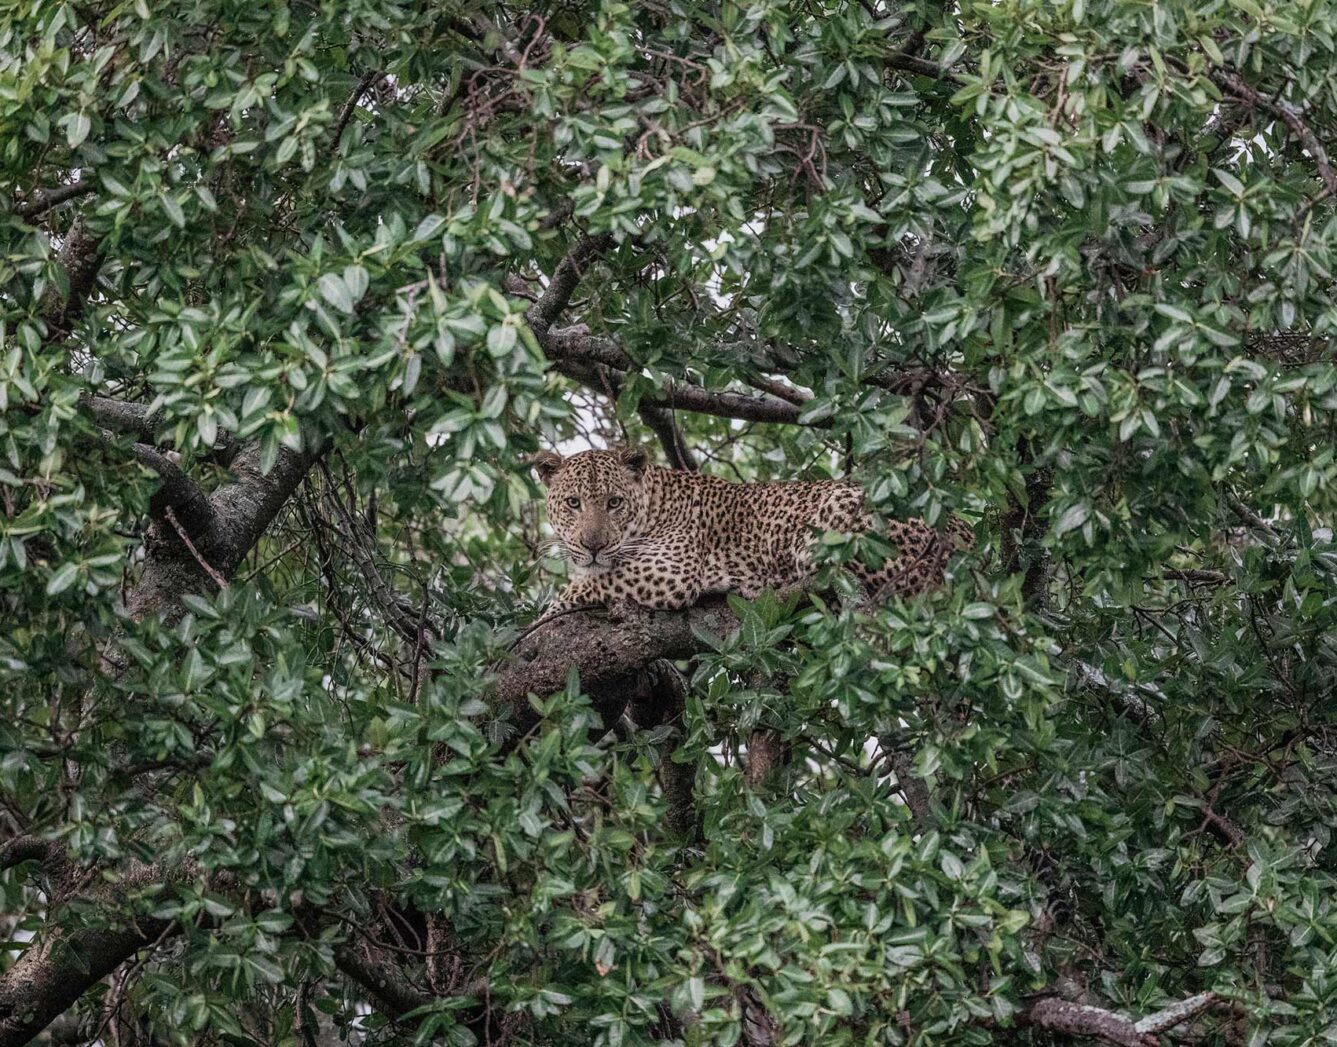 A leopard camouflages in the leaves